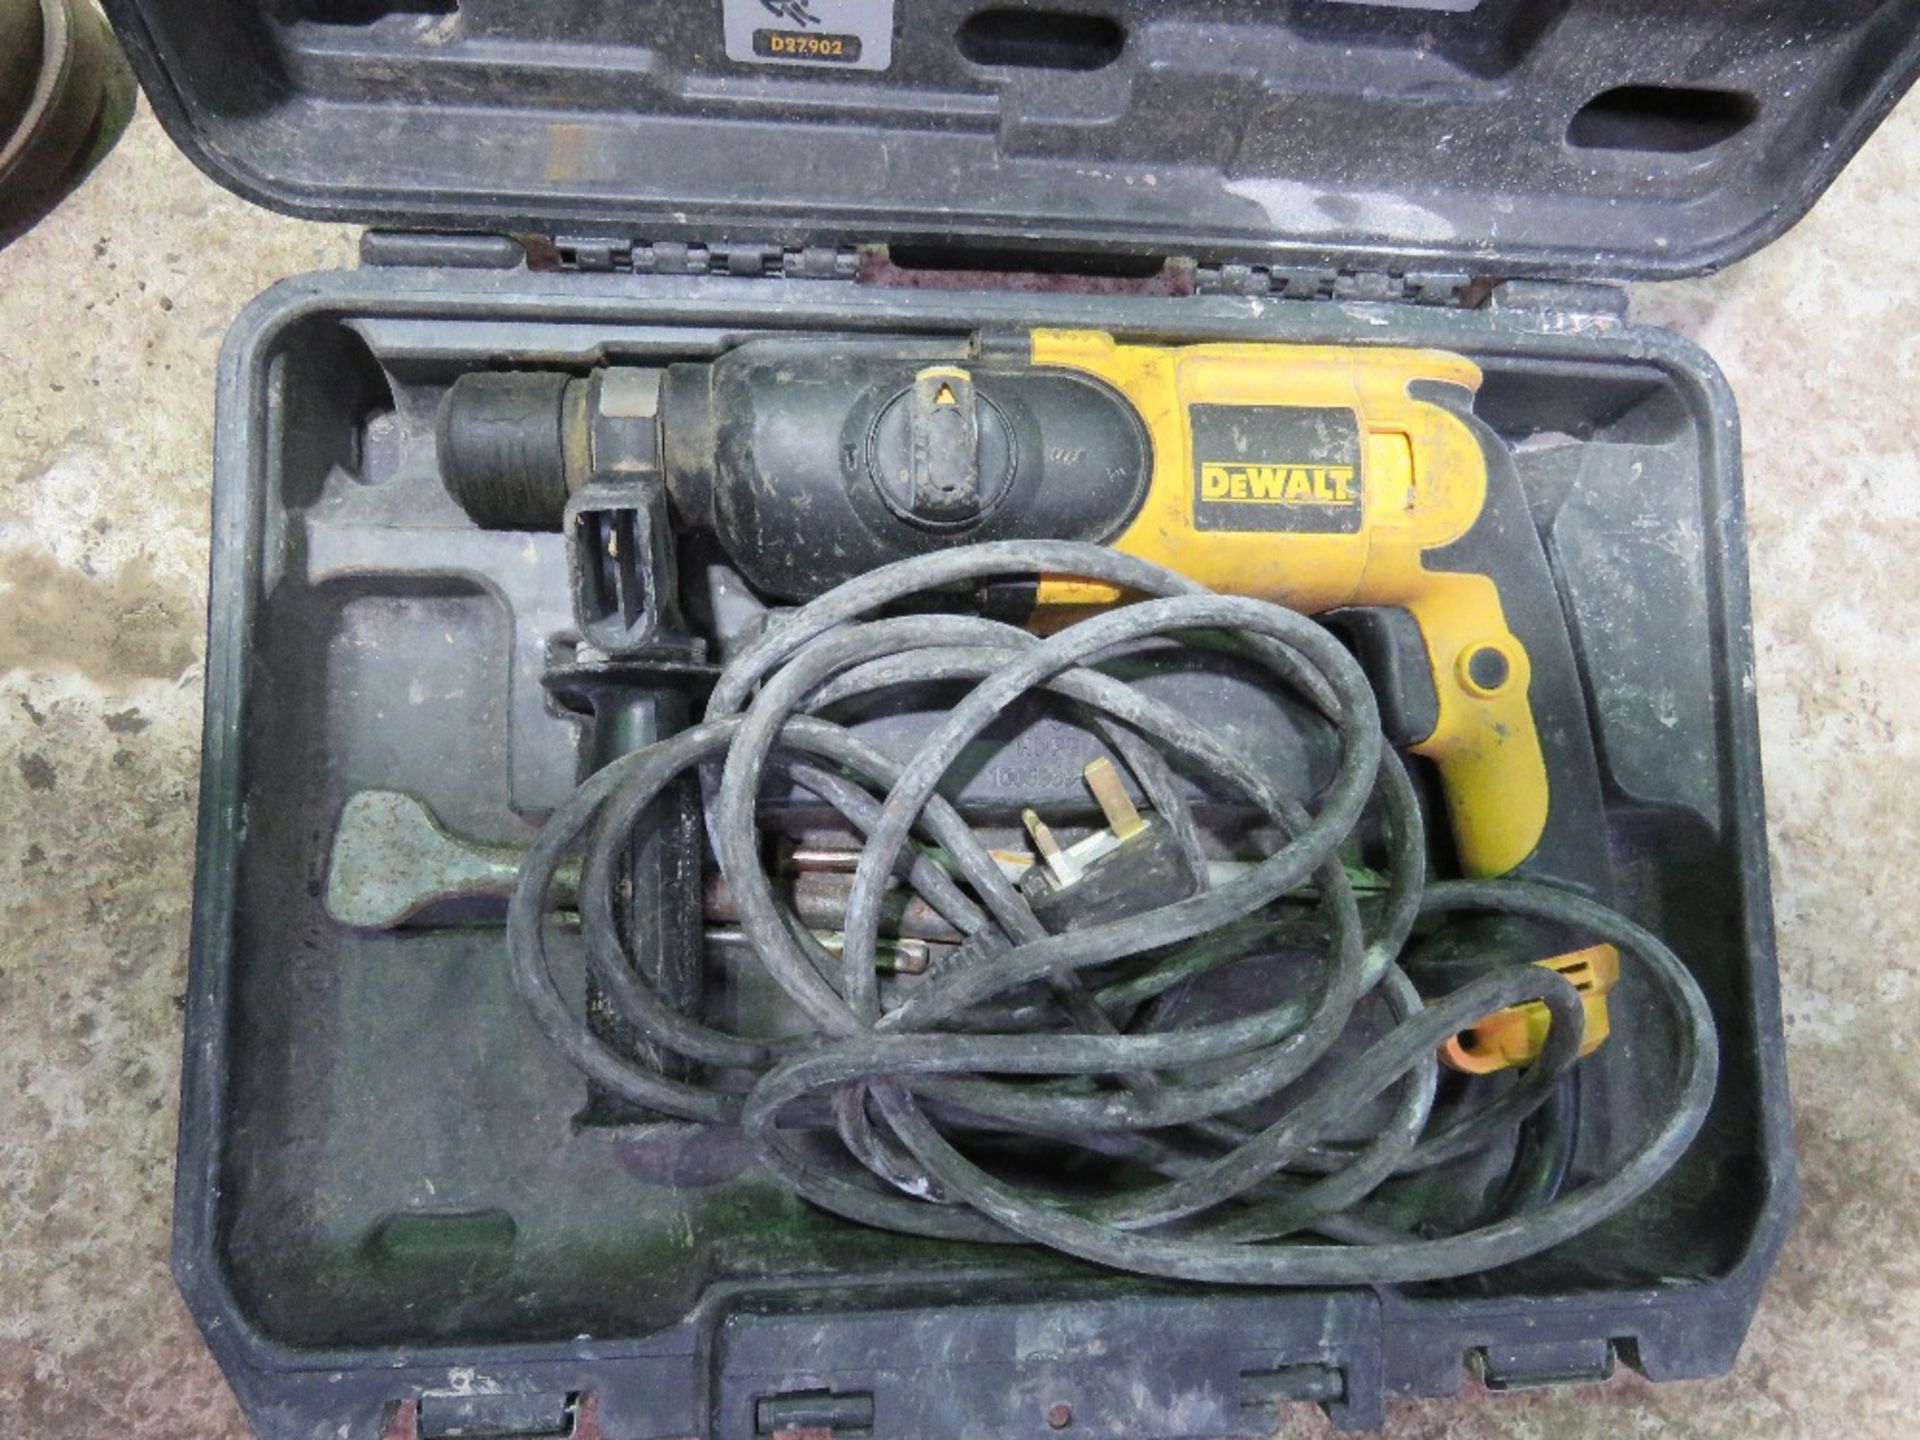 JCB HM25 HYDRAULIC BREAKER GUN PLUS A DEWALT 110VOLT DRILL.......THIS LOT IS SOLD UNDER THE AUCTIONE - Image 3 of 4